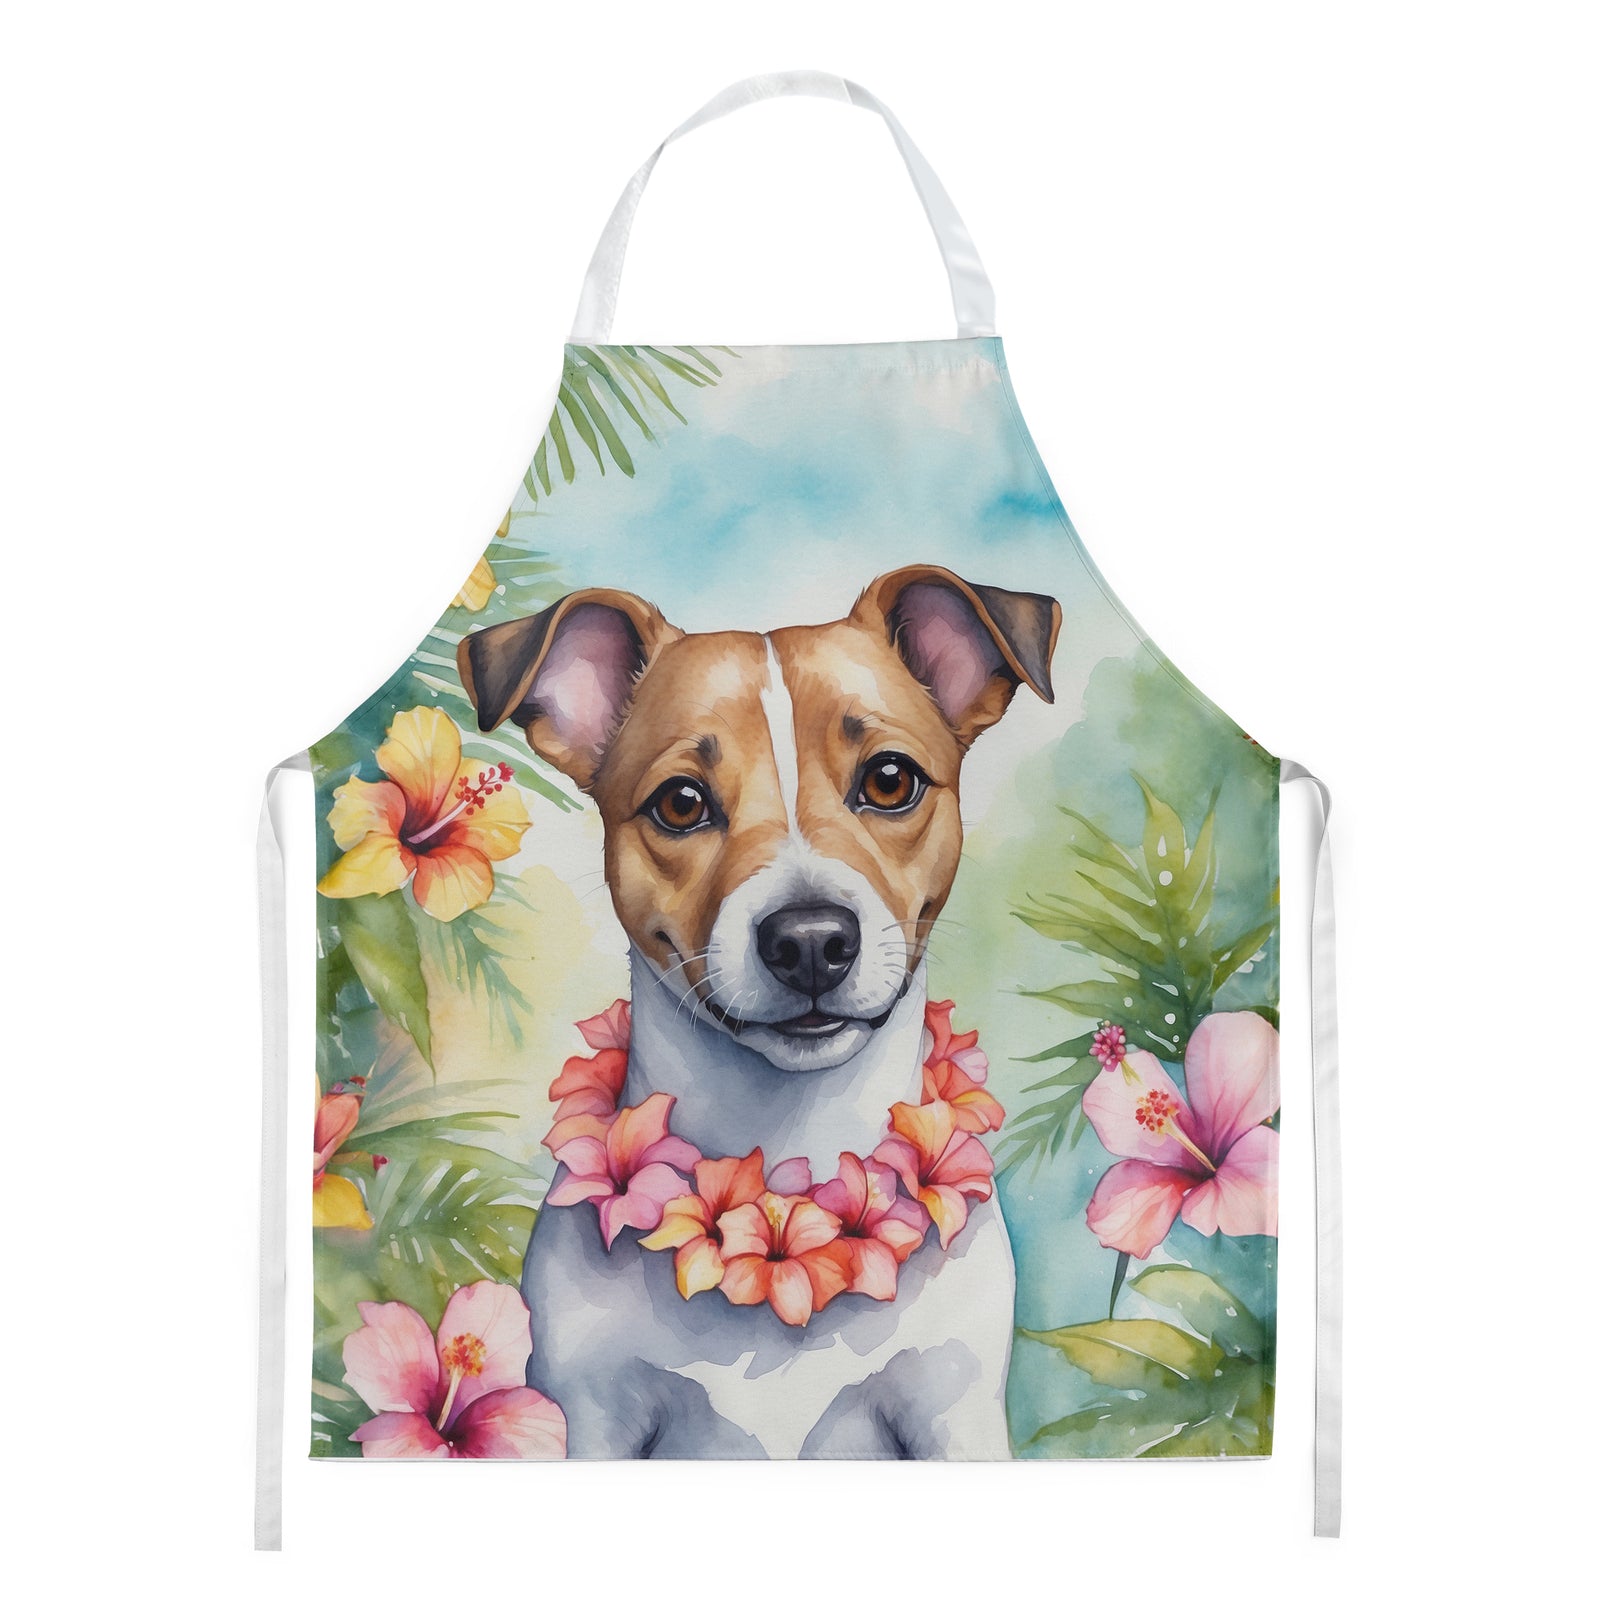 Buy this Jack Russell Terrier Luau Apron